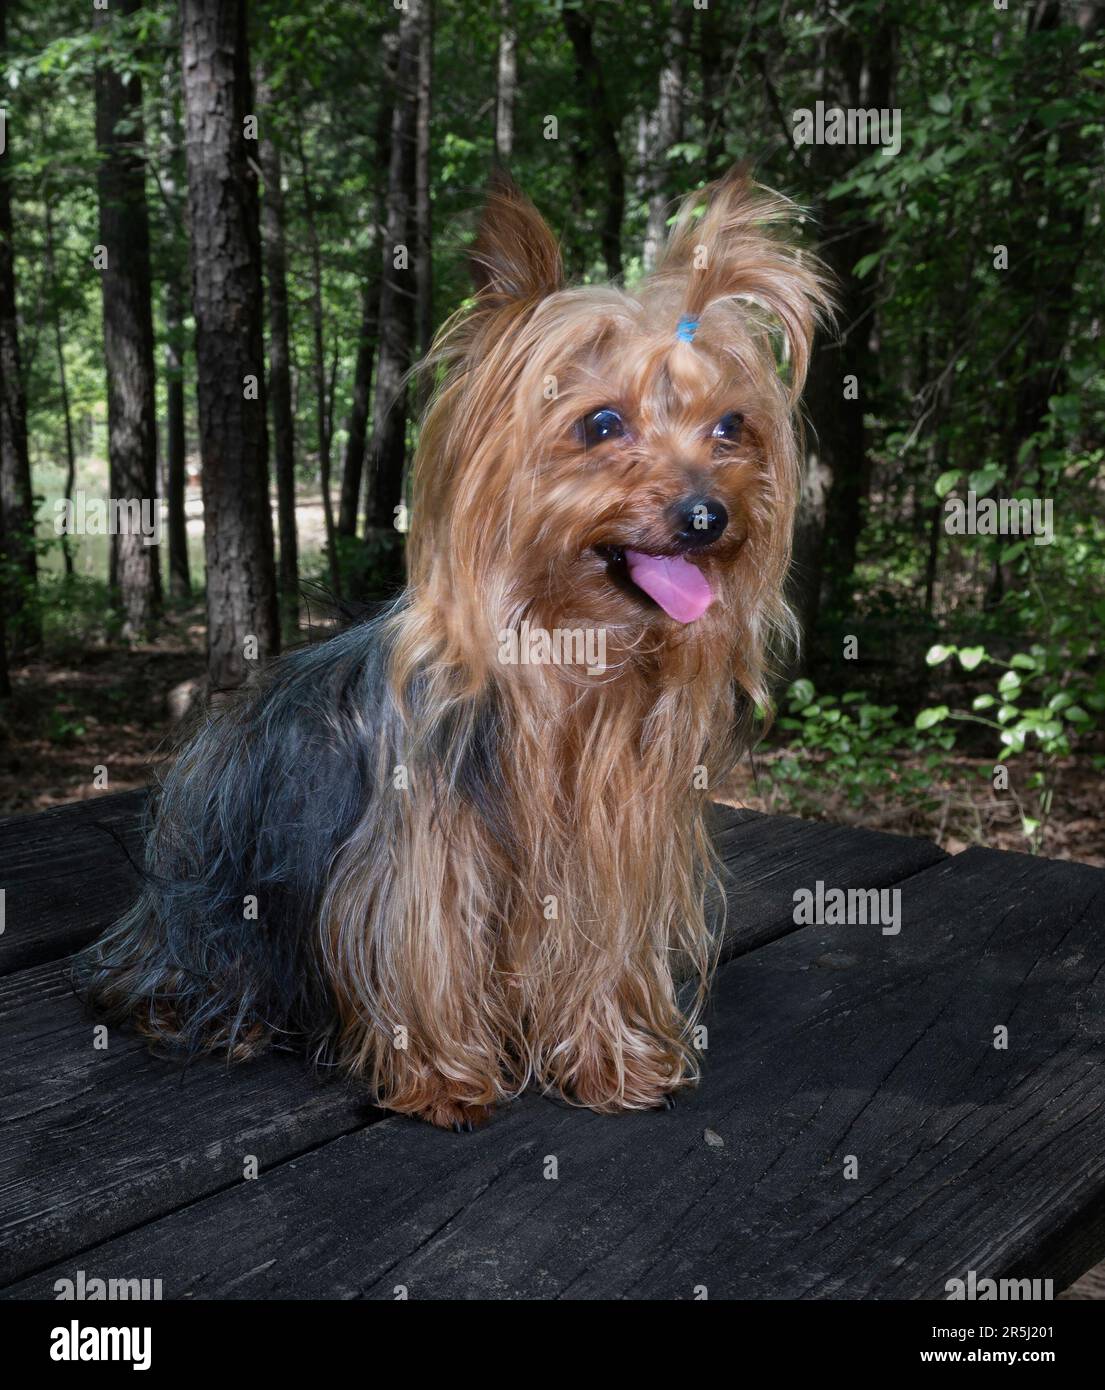 Funny look on the face of a small dog on a picnic table outdoors Stock Photo